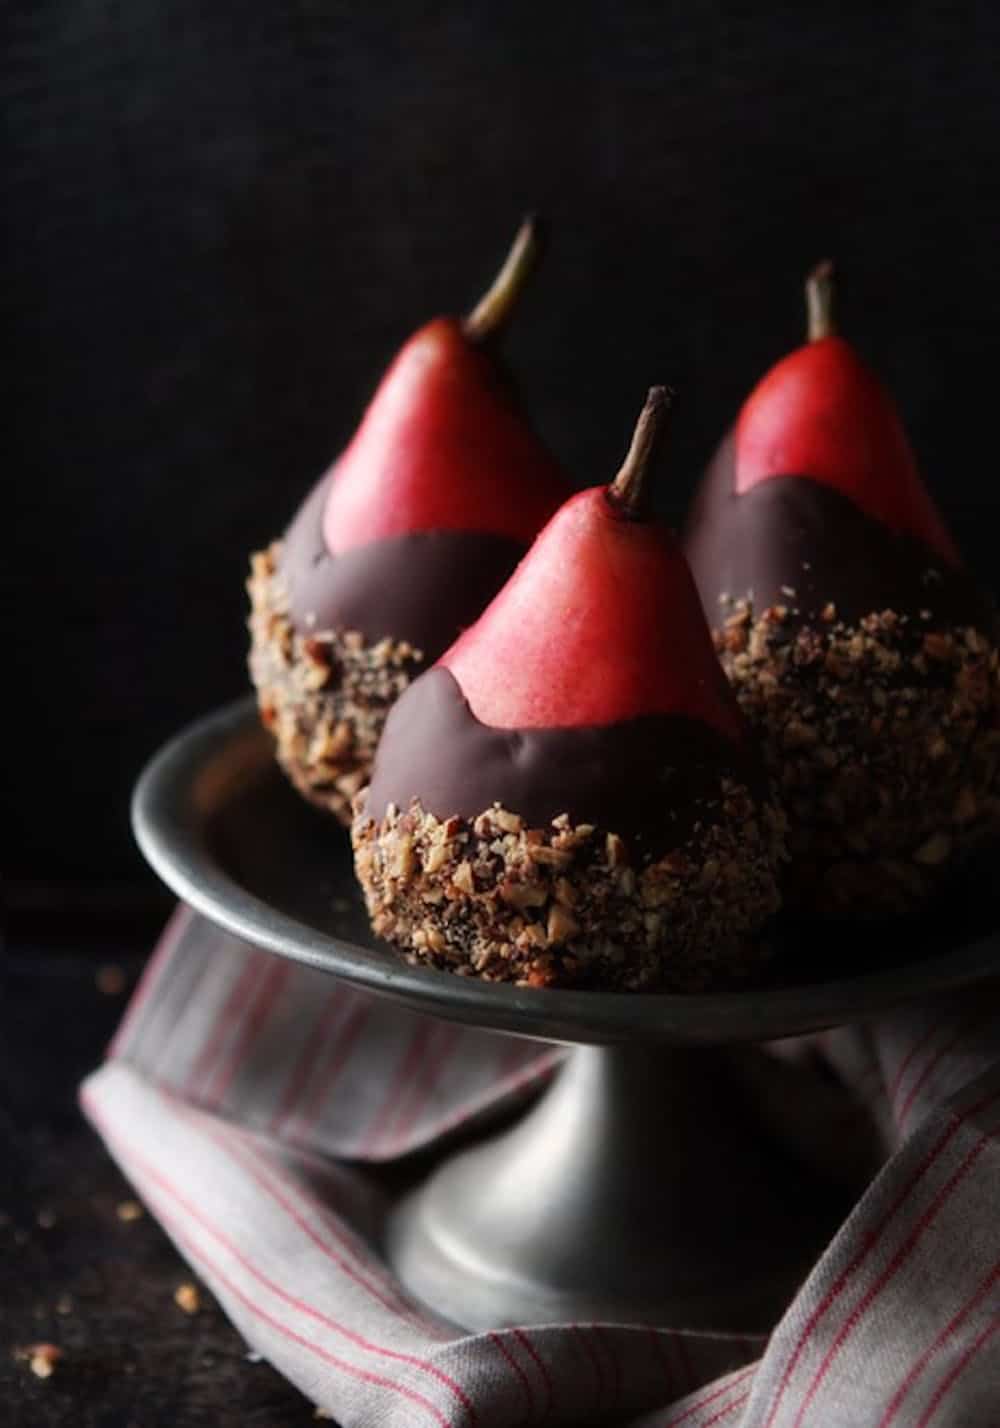 Thanksgiving Dessert - Chocolate Dipped Pears with Almond Crunch